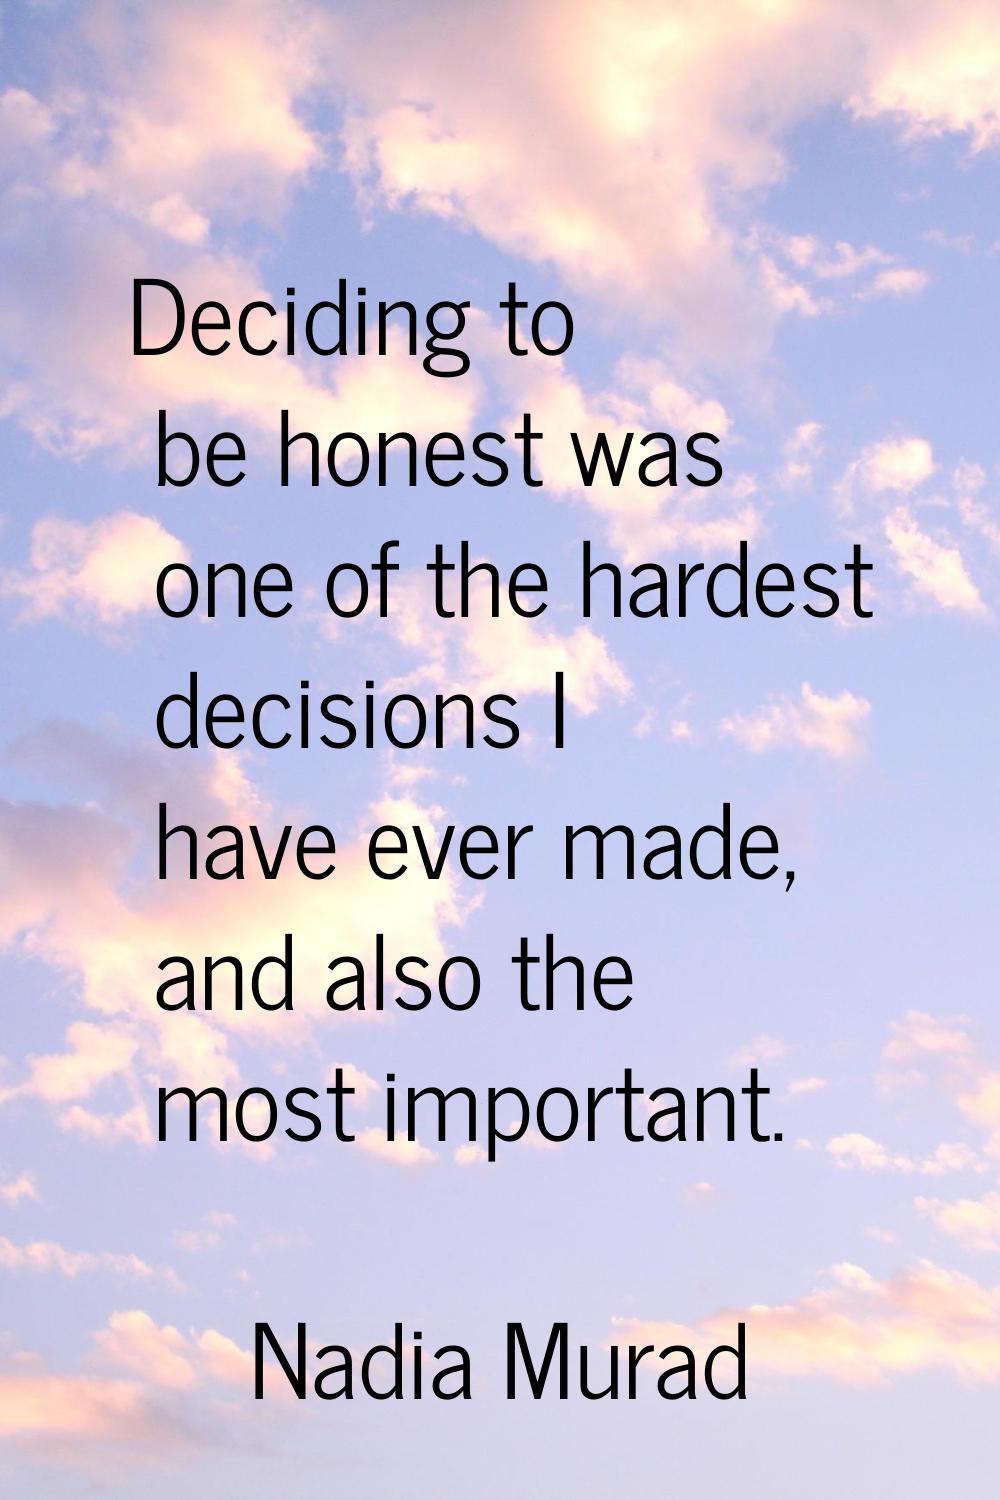 Deciding to be honest was one of the hardest decisions I have ever made, and also the most importan